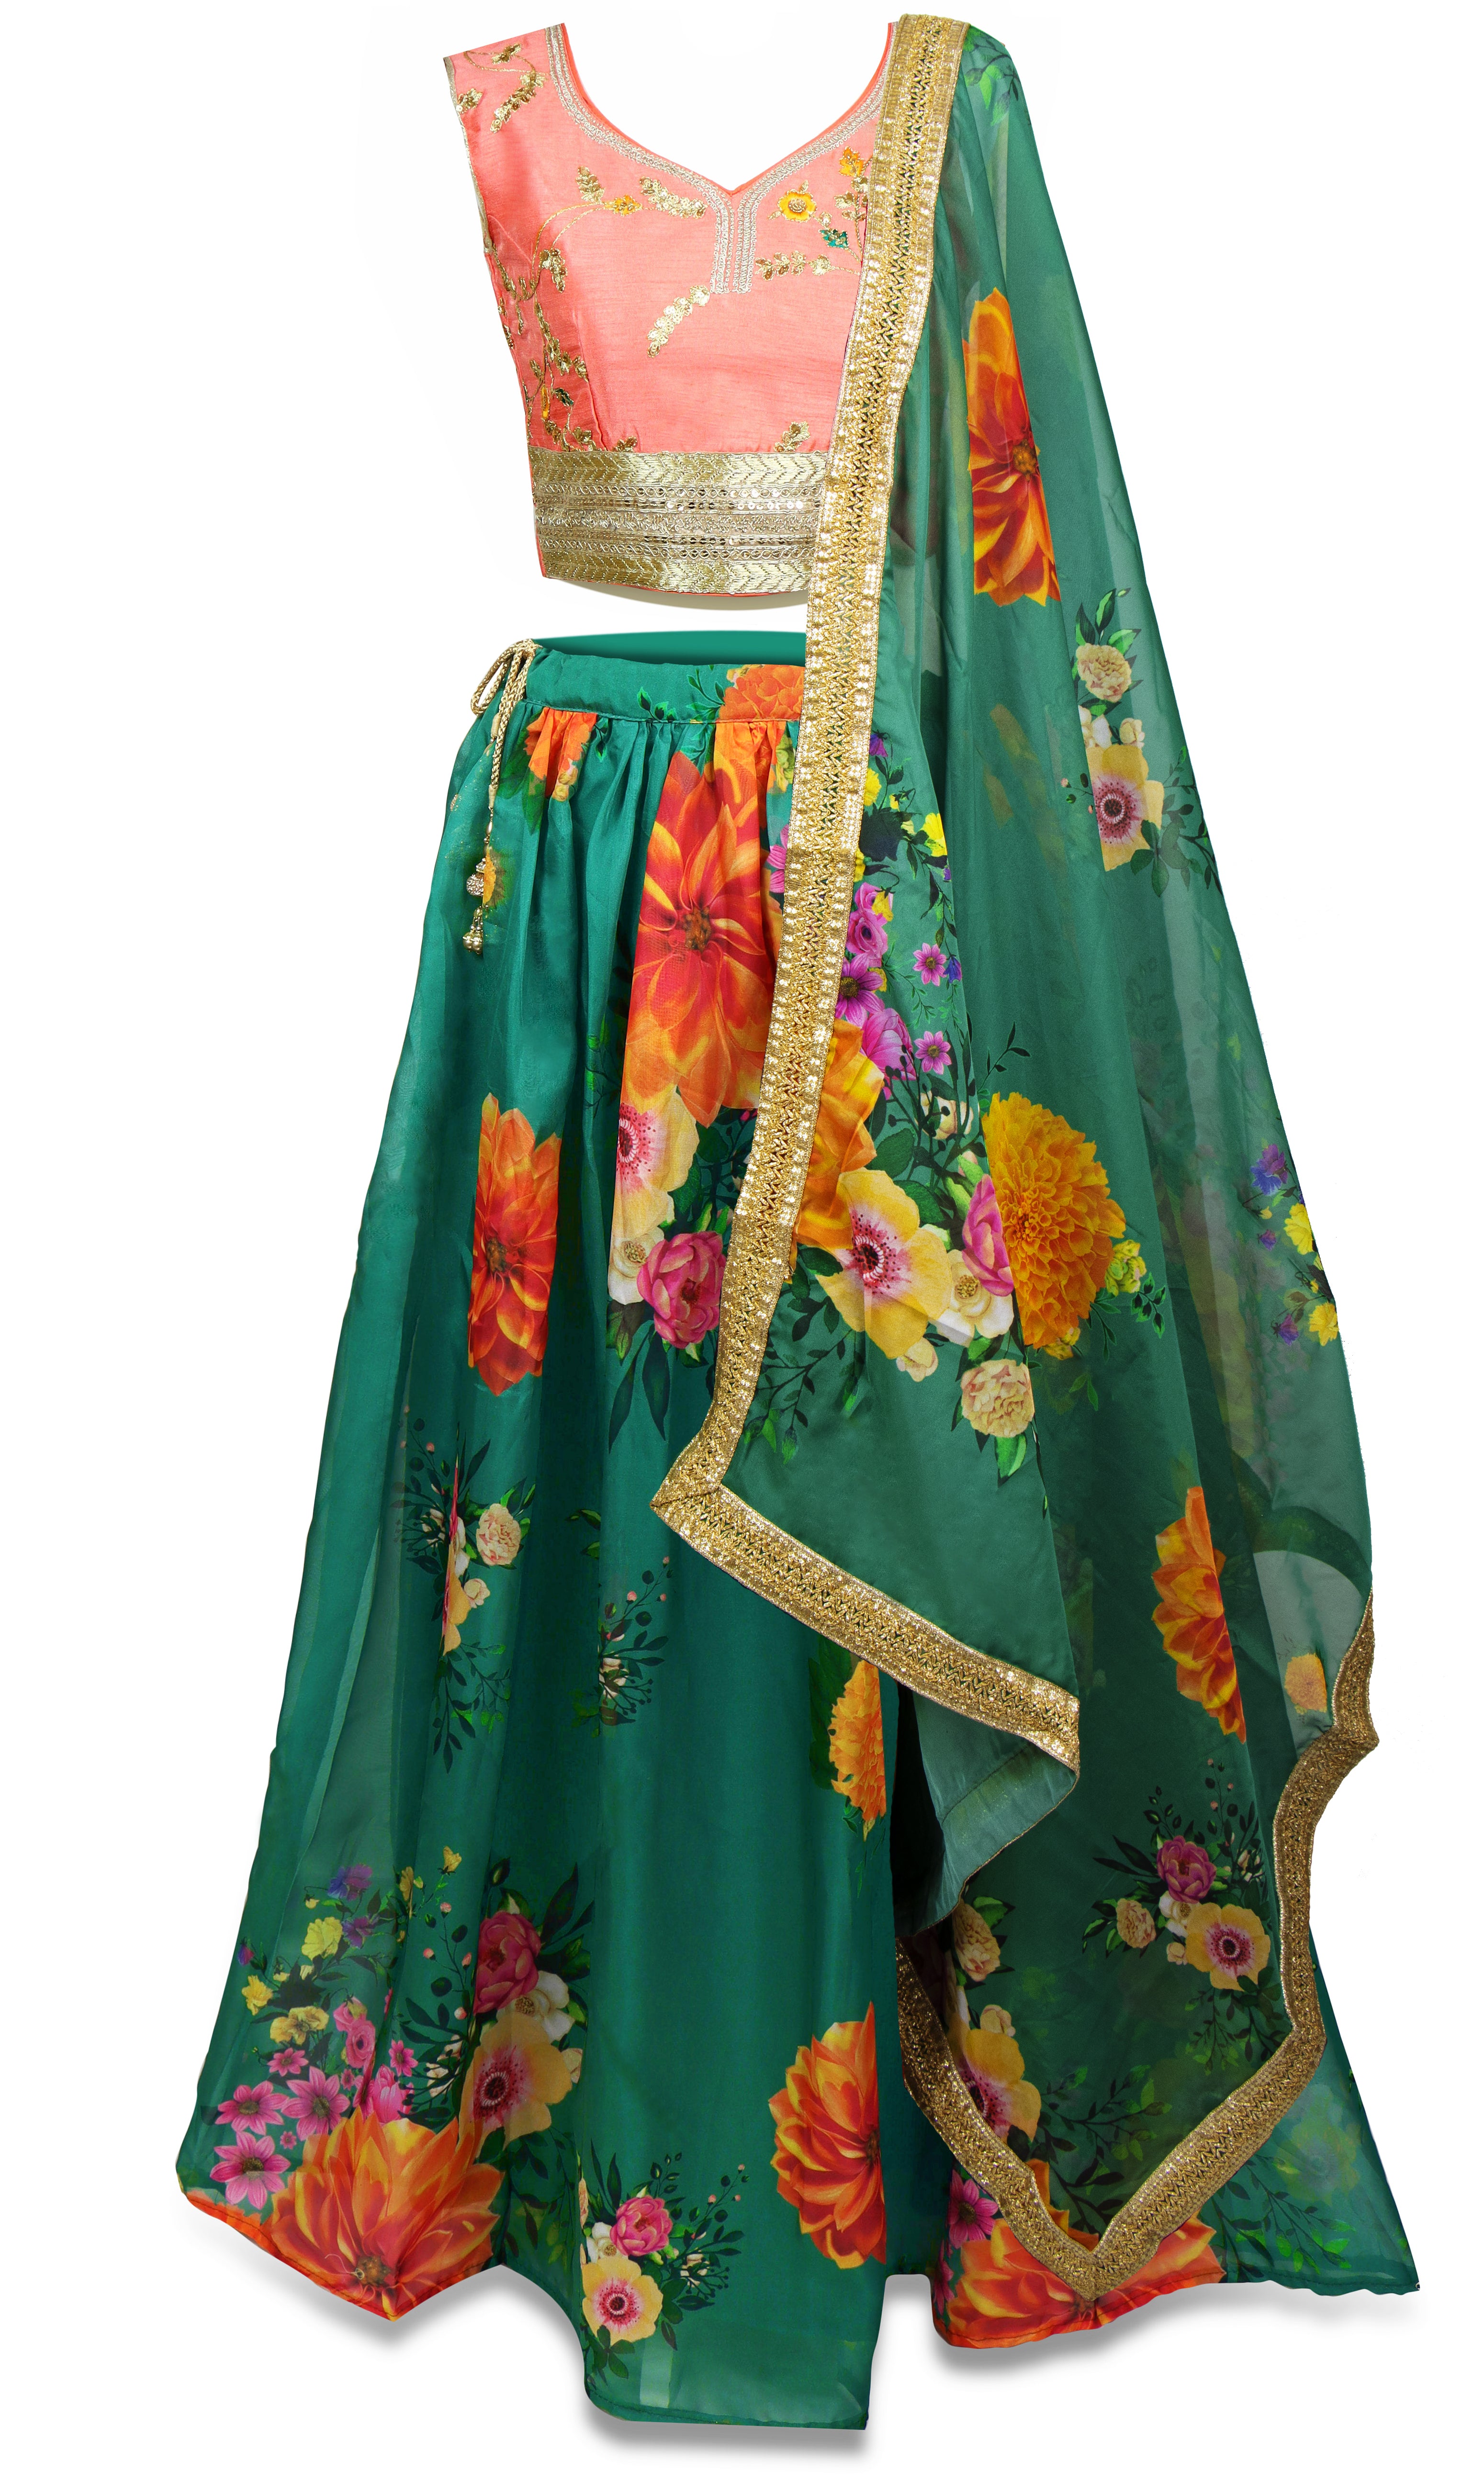 Wildflower Lehenga with Gold thread made blouse with wildflower Duppta. Place your order.